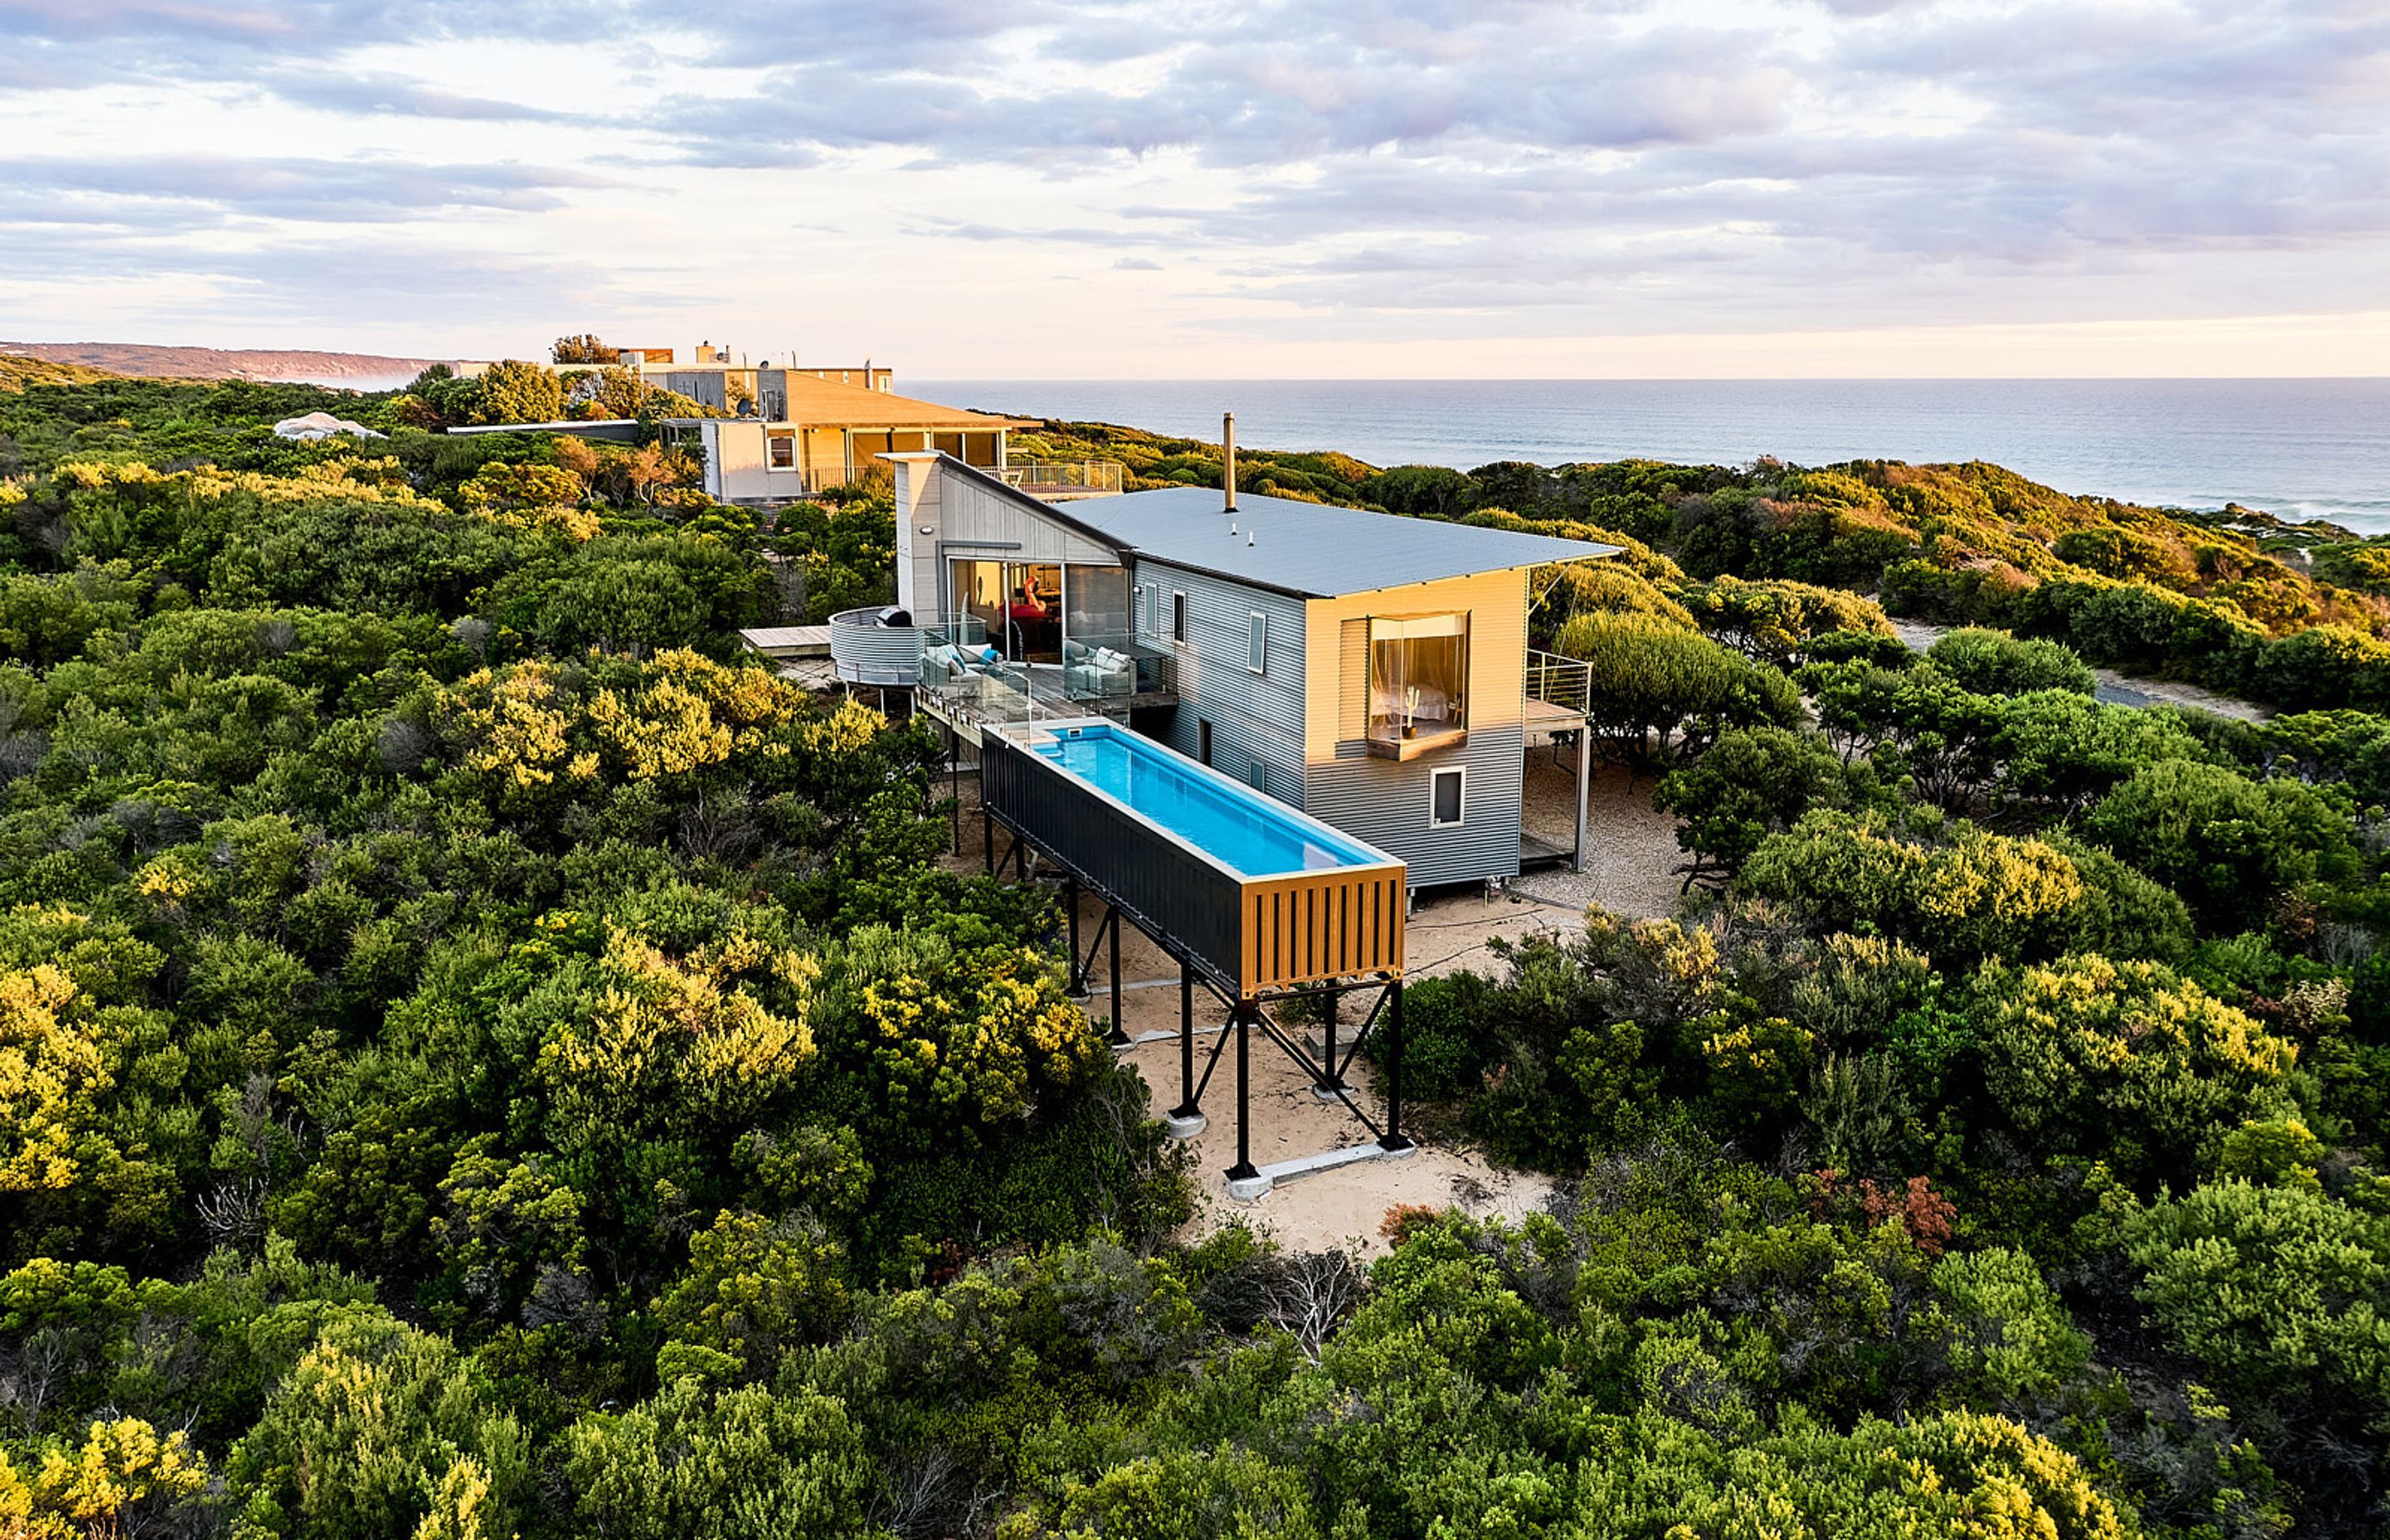 St Andrews Beach by Shipping Container Pools | Photography by Chris McConville